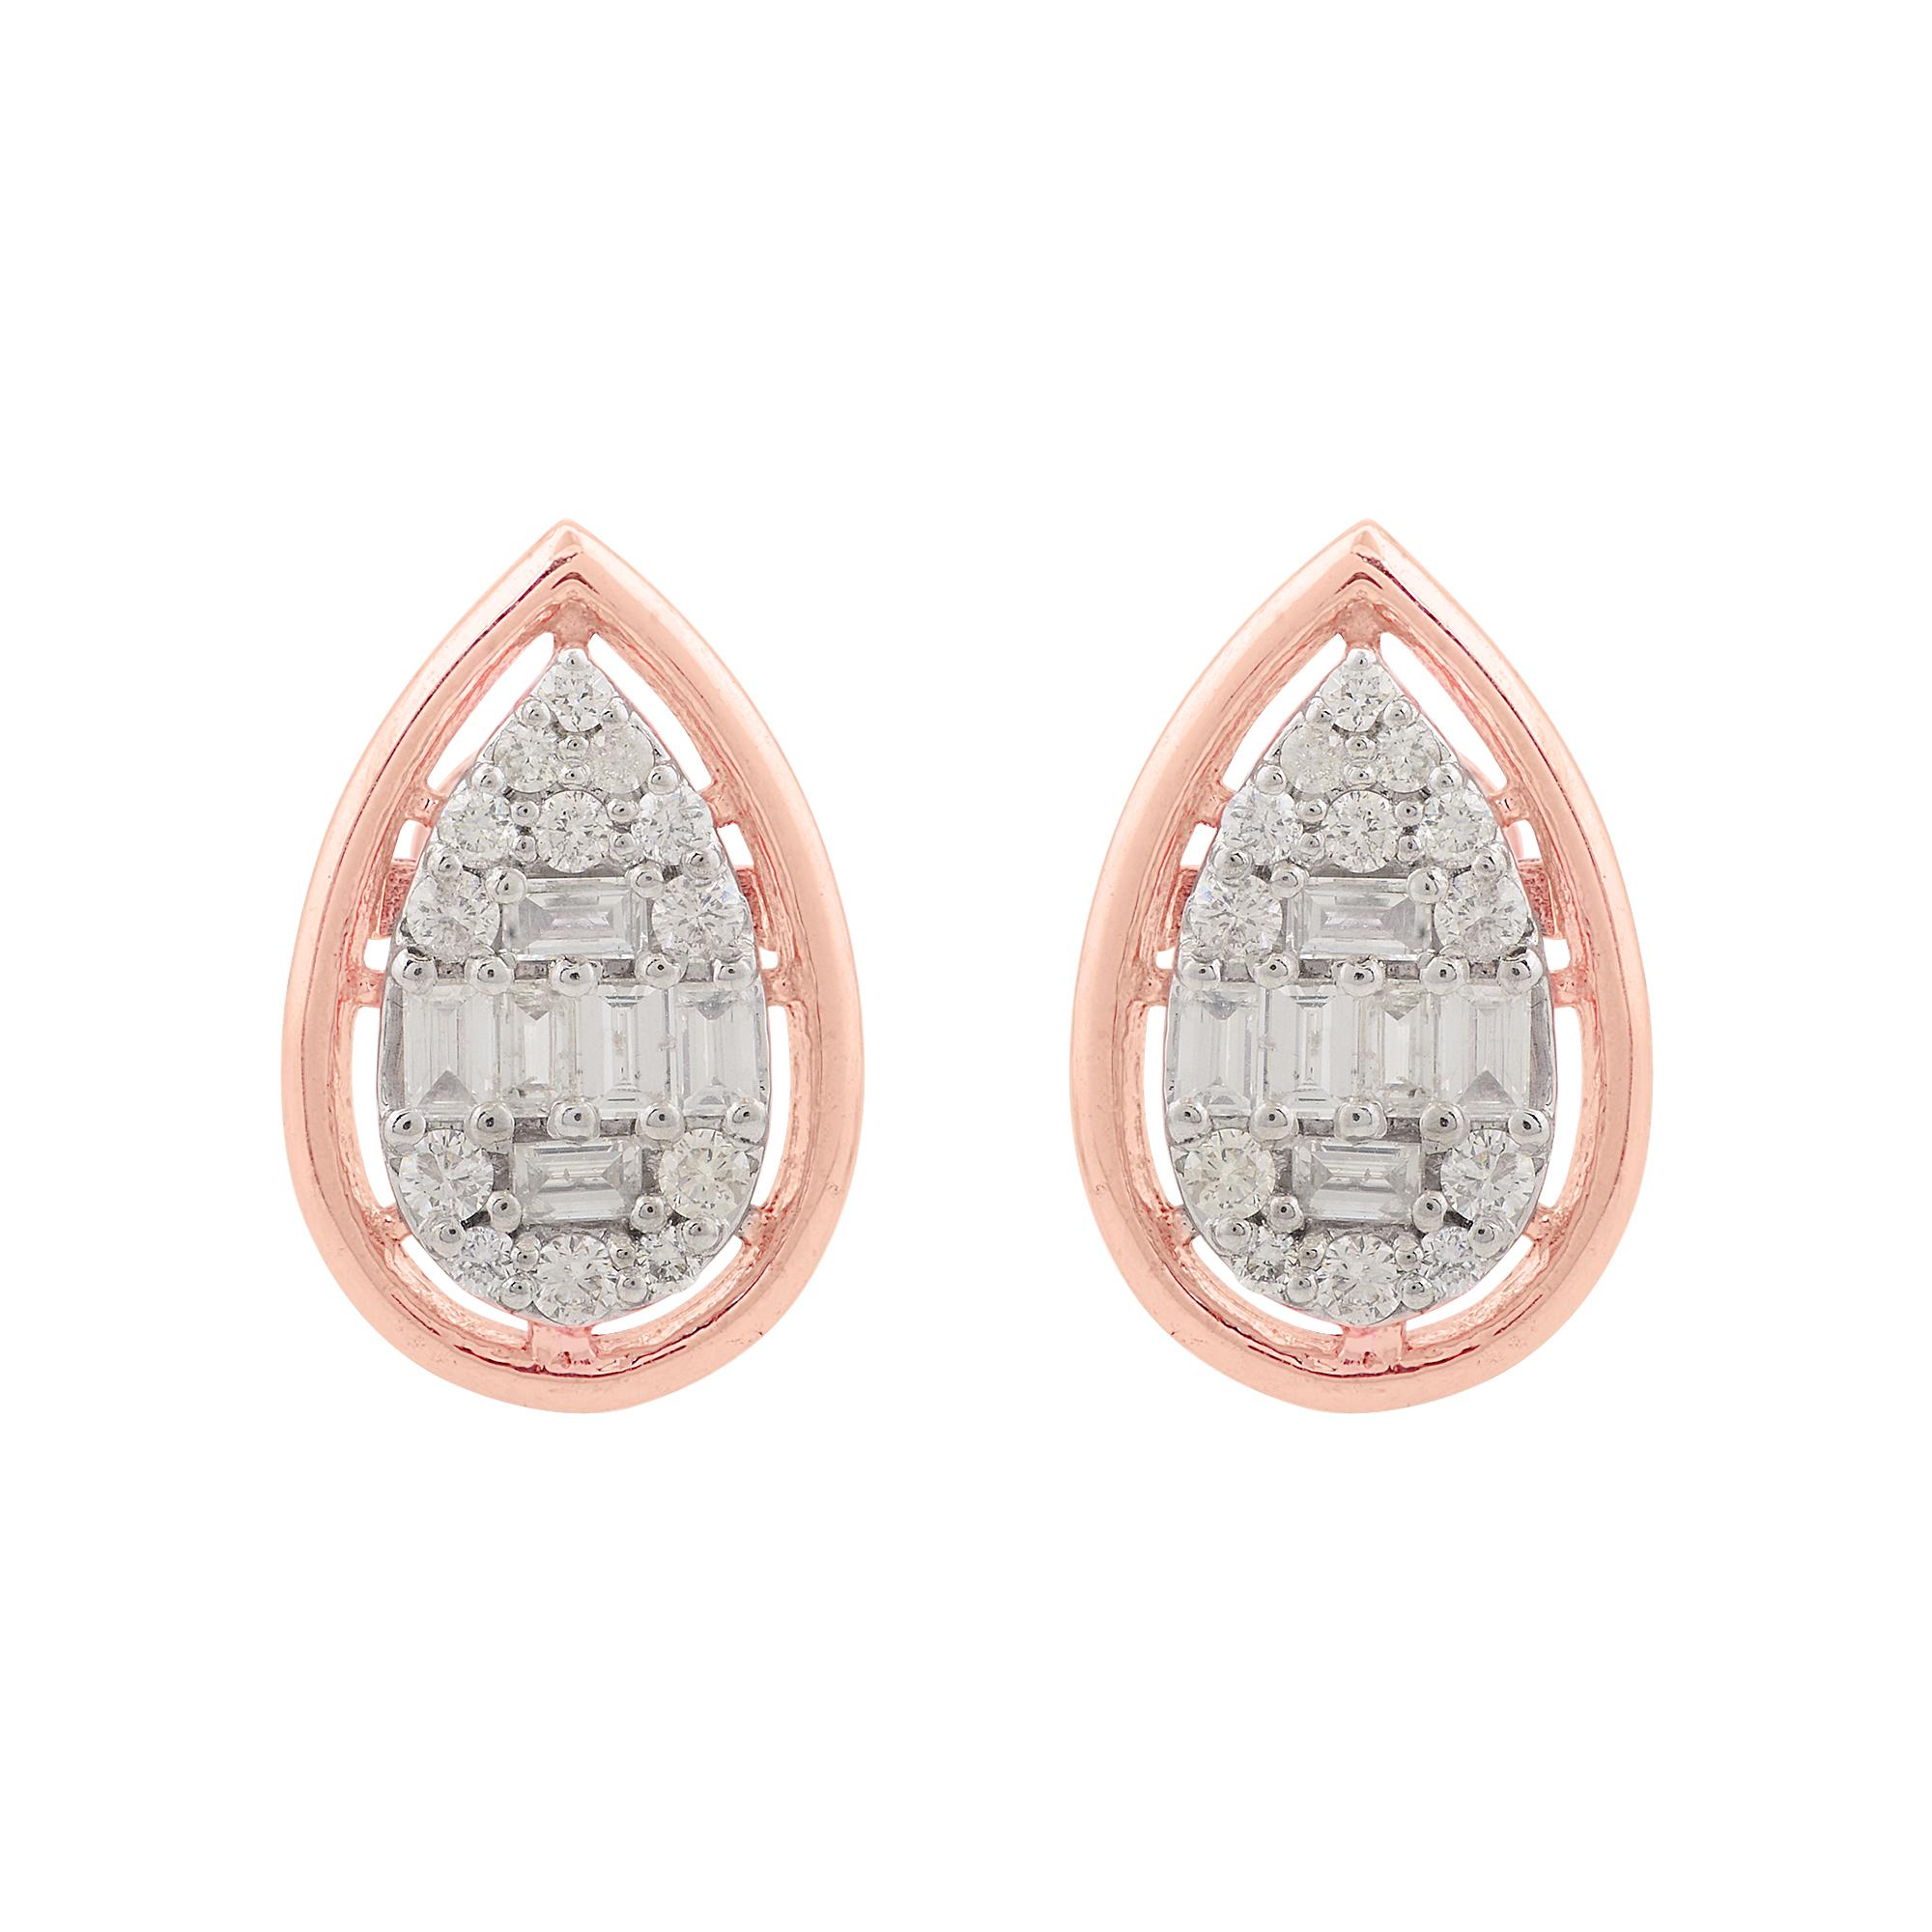 With a focus on quality and craftsmanship, these earrings showcase diamonds of SI clarity and HI color, ensuring a captivating sparkle that catches the light from every angle. The warm, rosy hue of the rose gold setting adds a touch of romantic